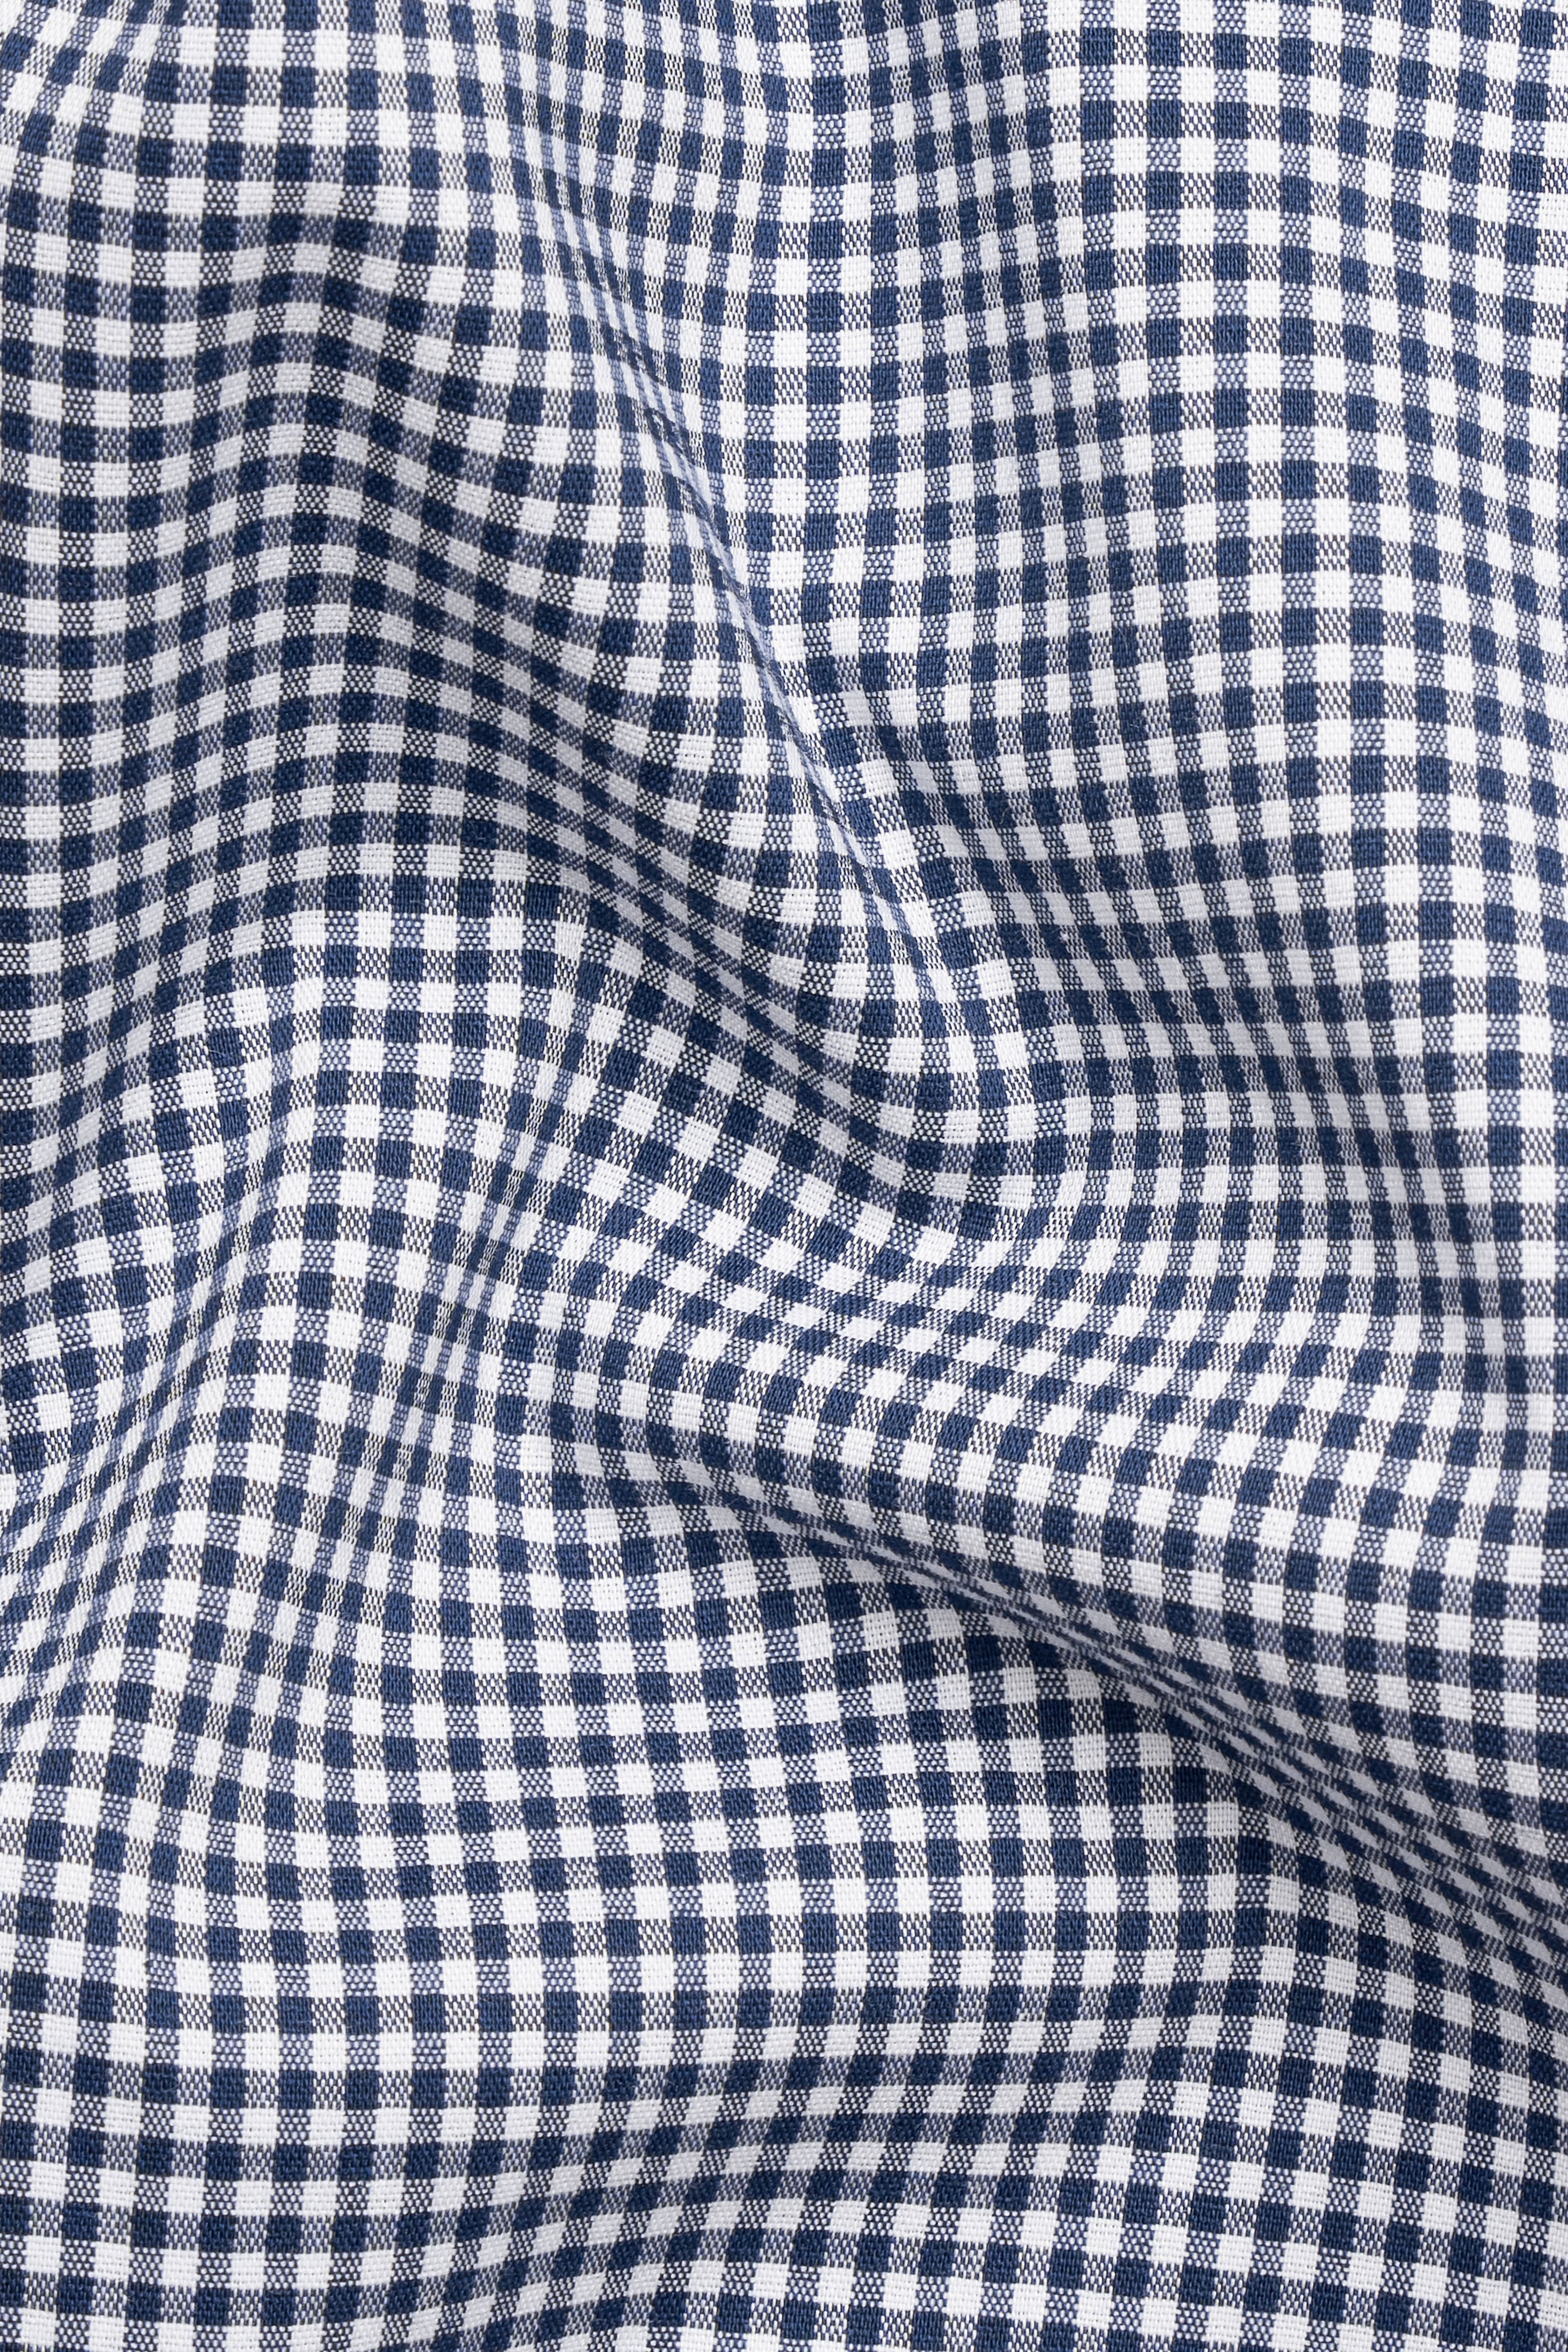 Cloud Burst Blue and White Gingham Checkered Royal Oxford Shirt